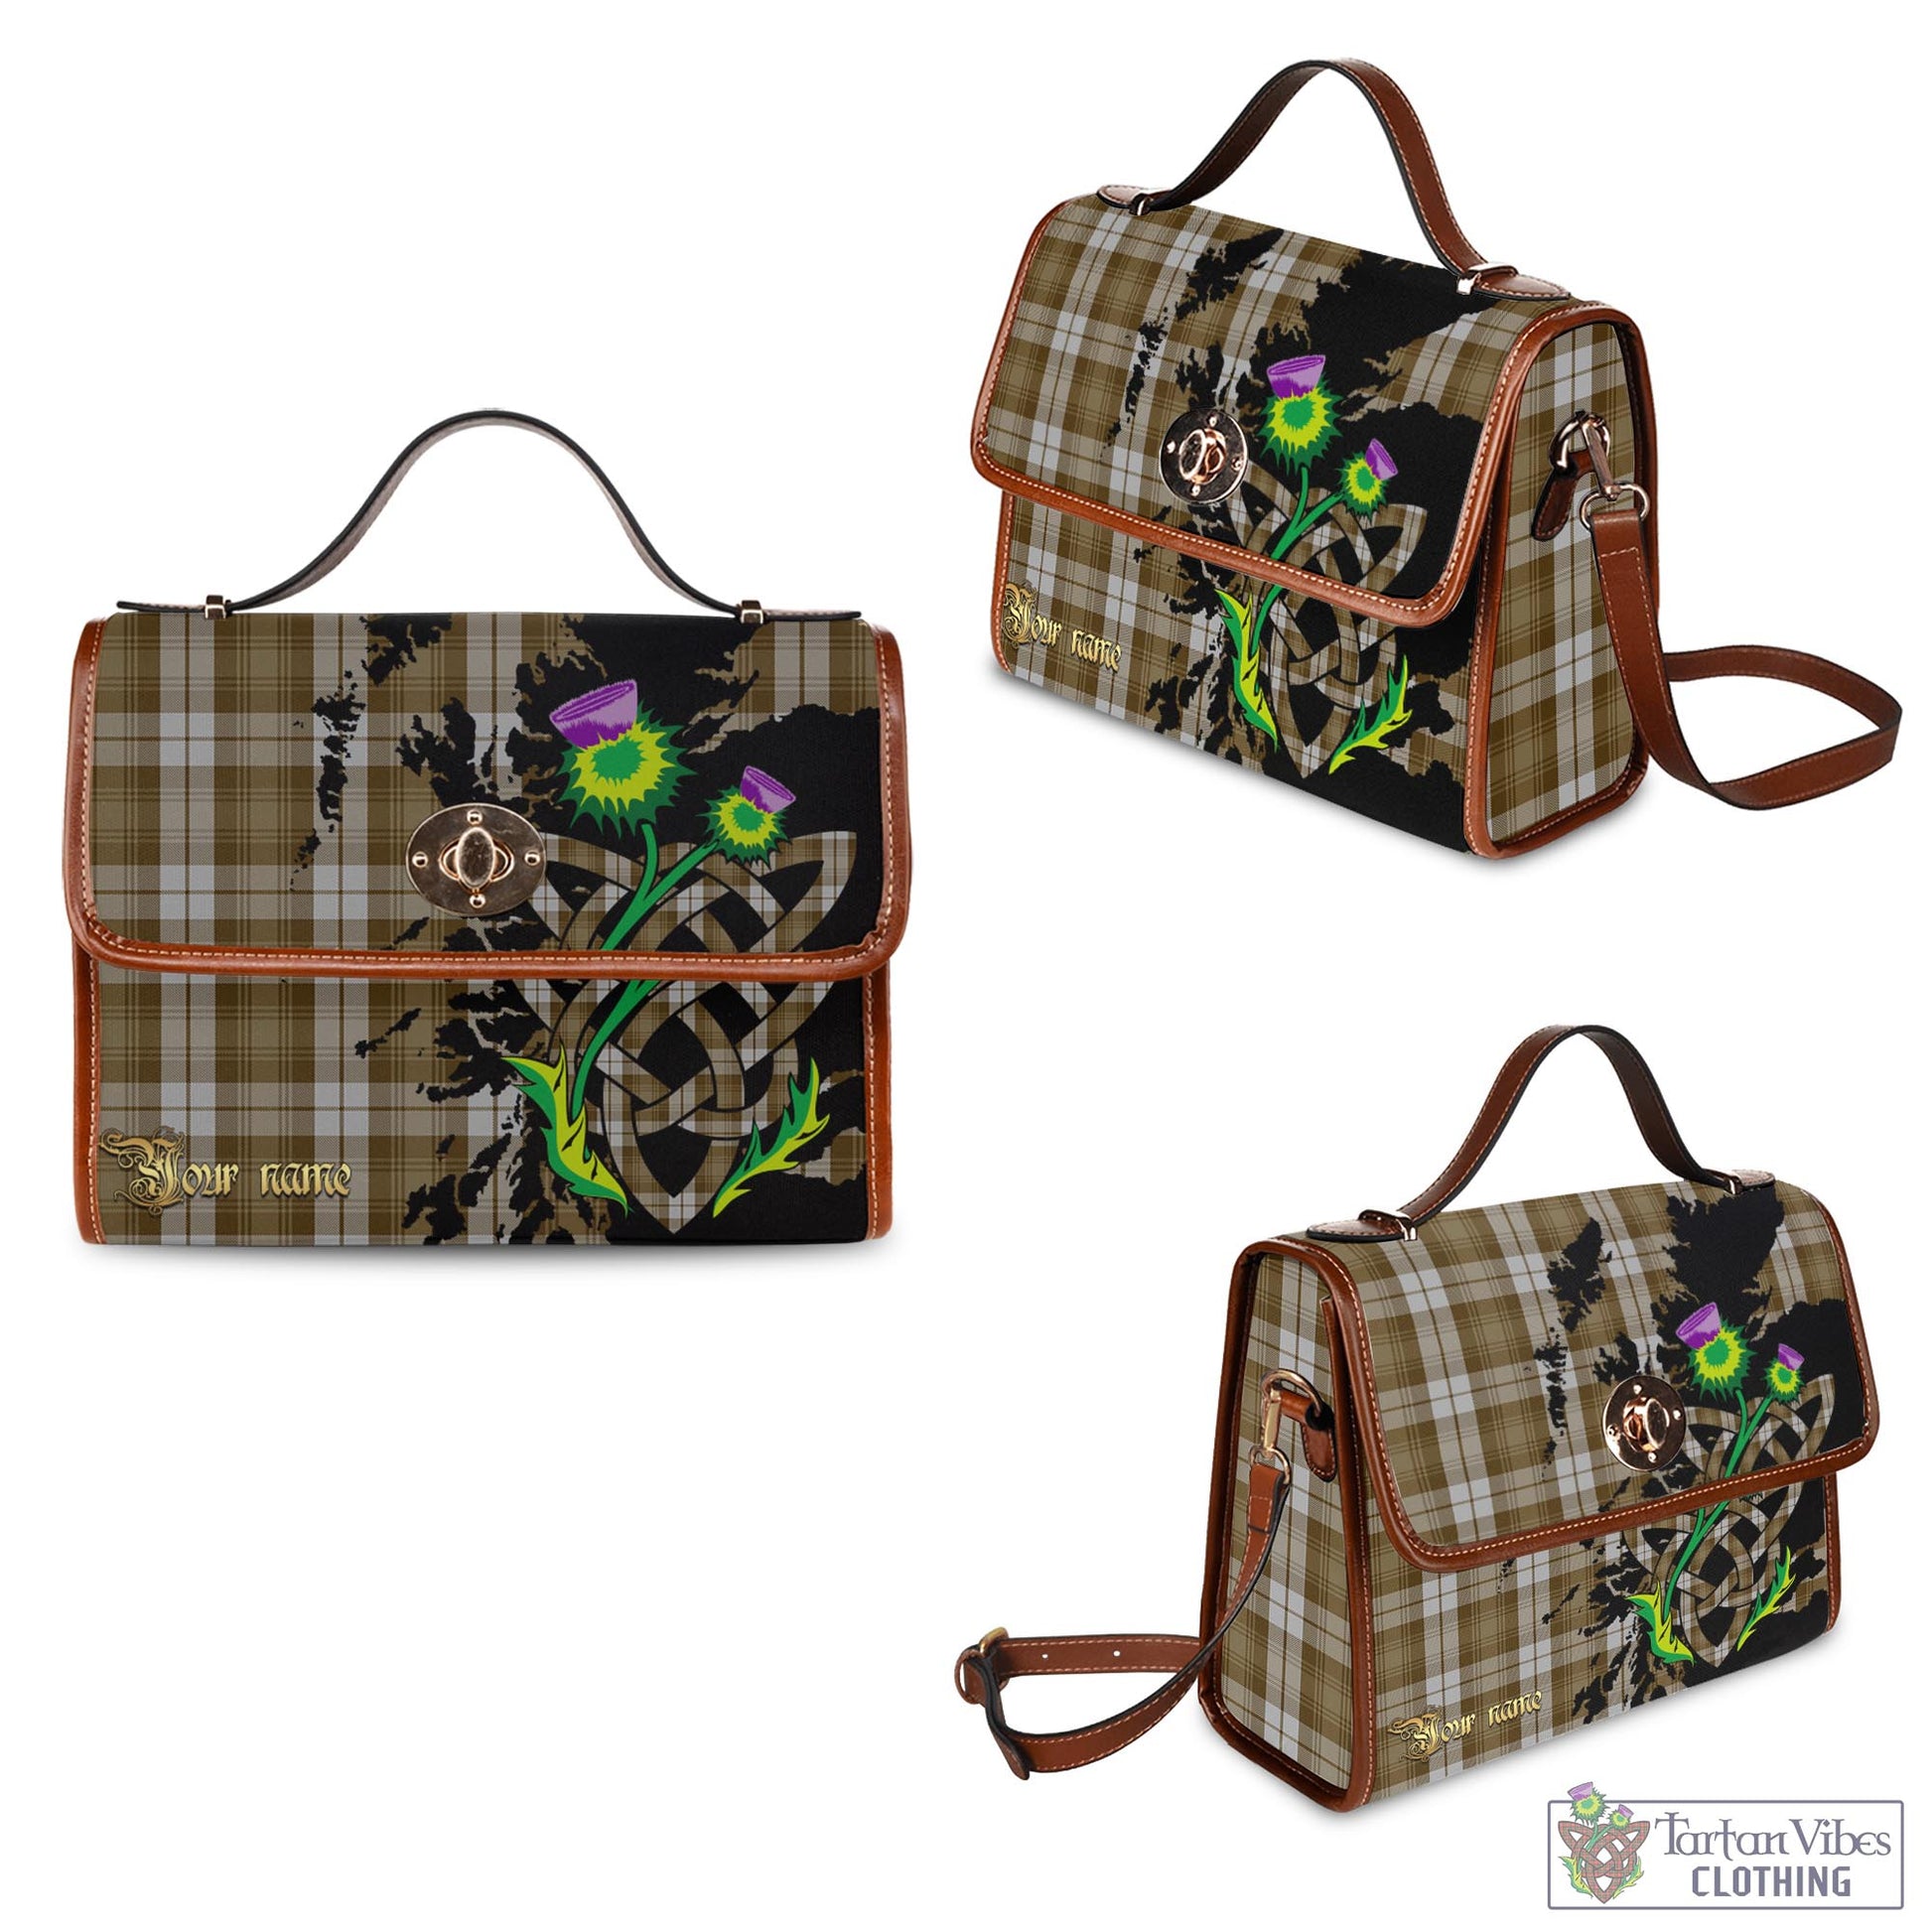 Tartan Vibes Clothing Baillie Dress Tartan Waterproof Canvas Bag with Scotland Map and Thistle Celtic Accents